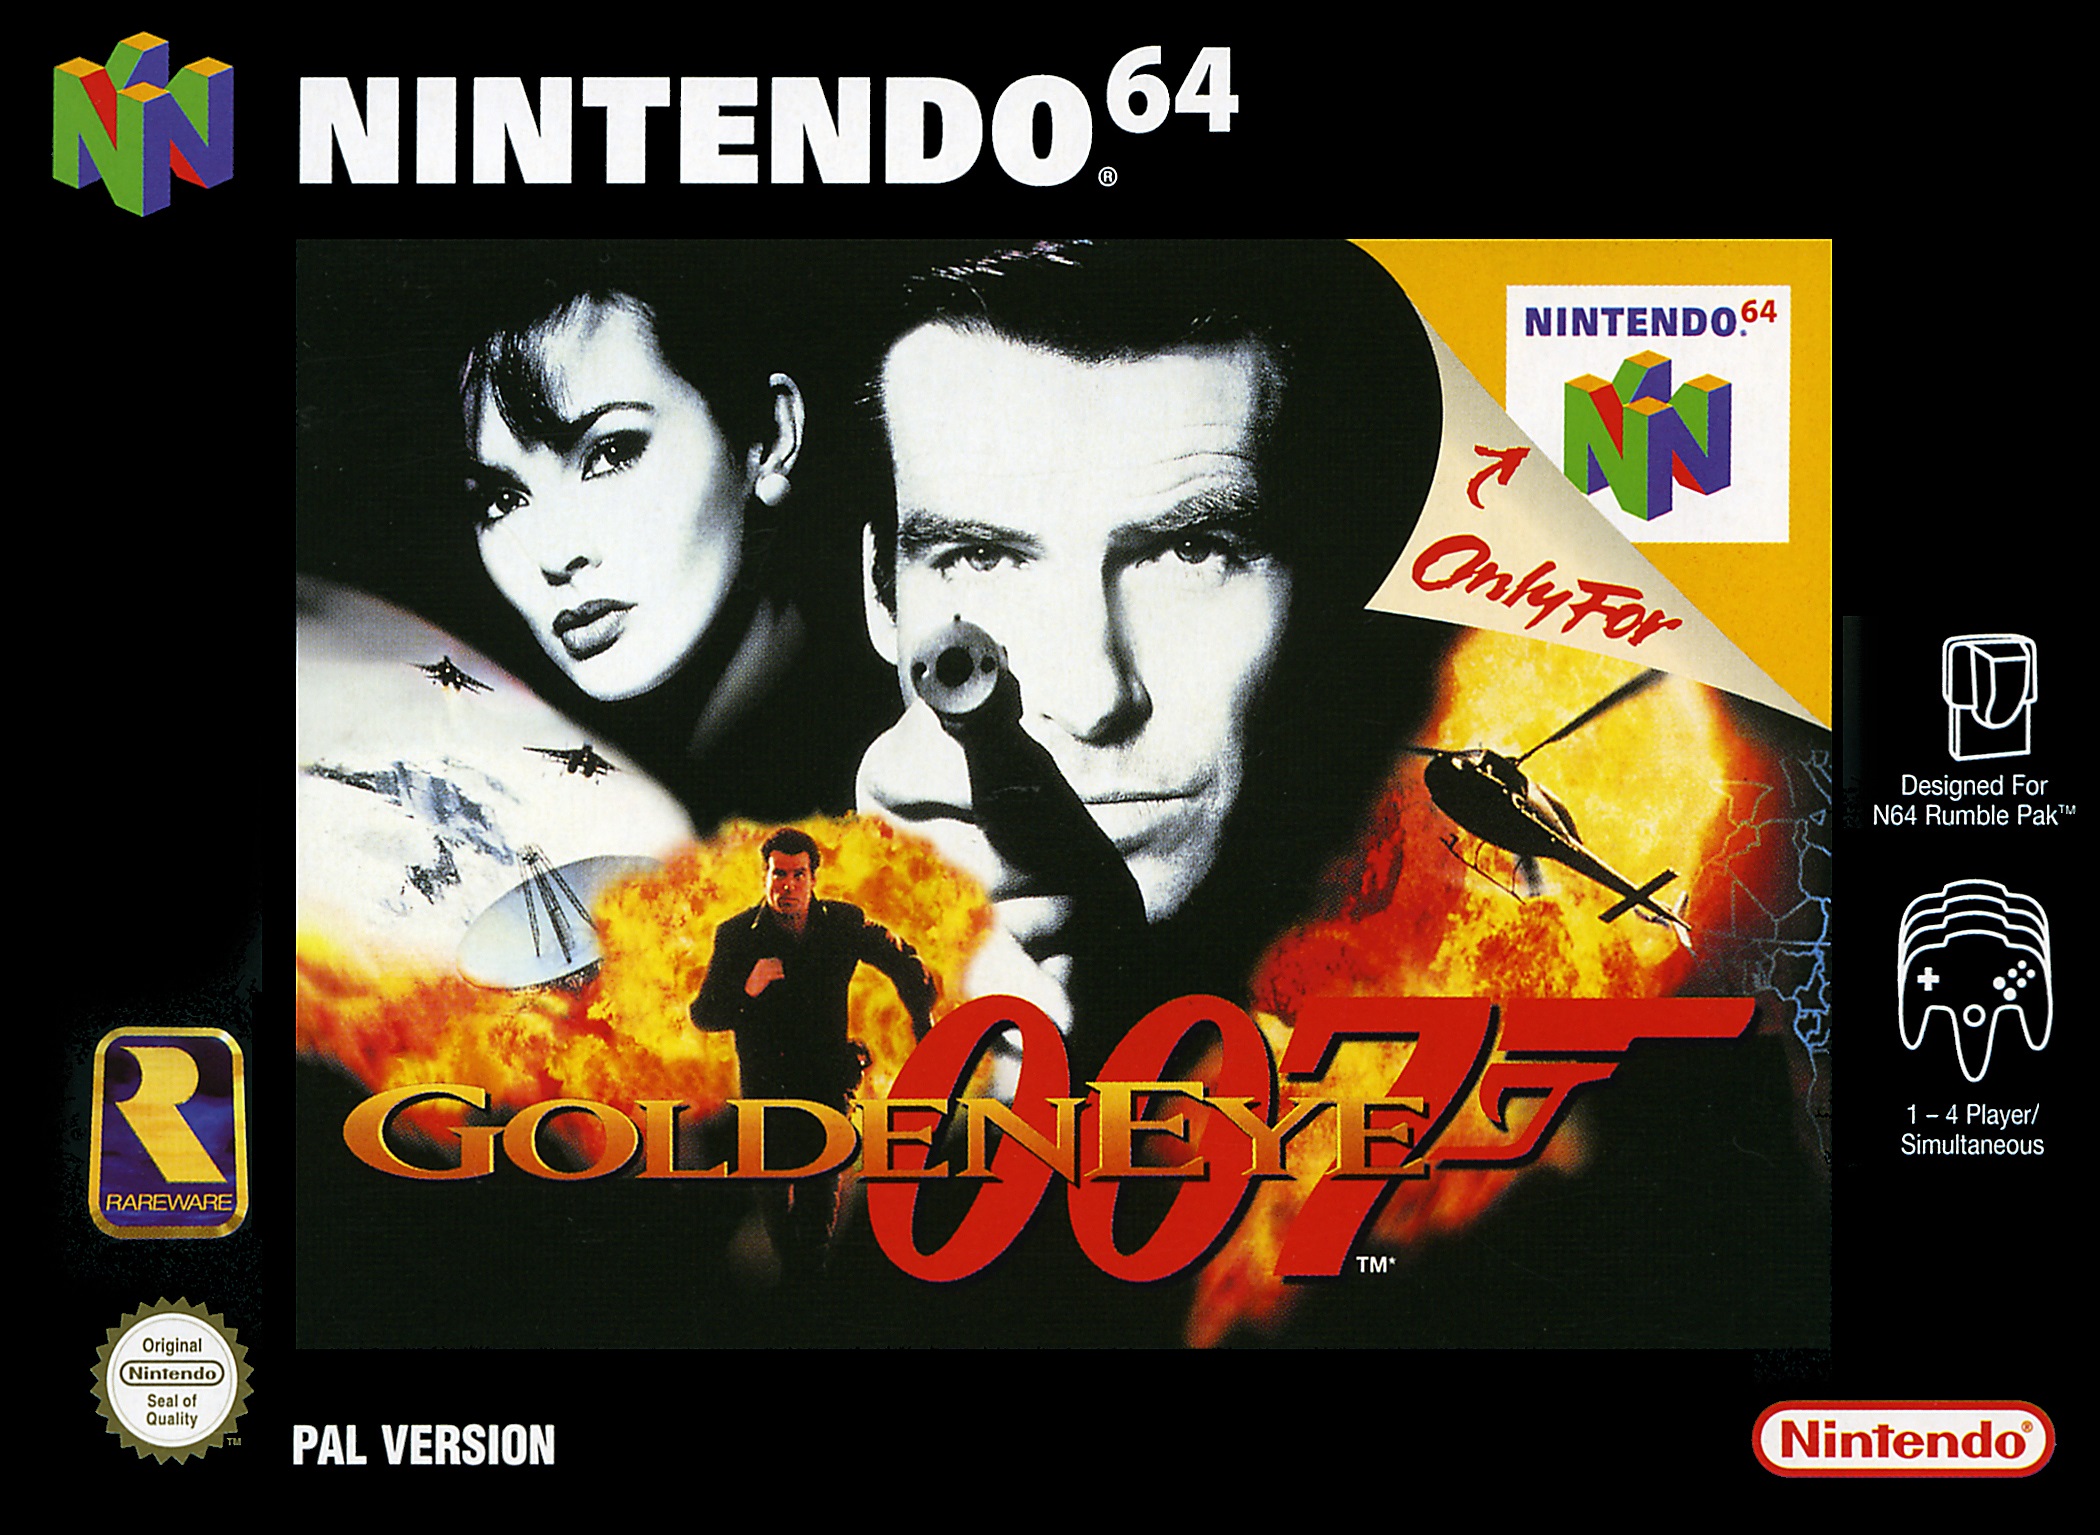 project 007 game